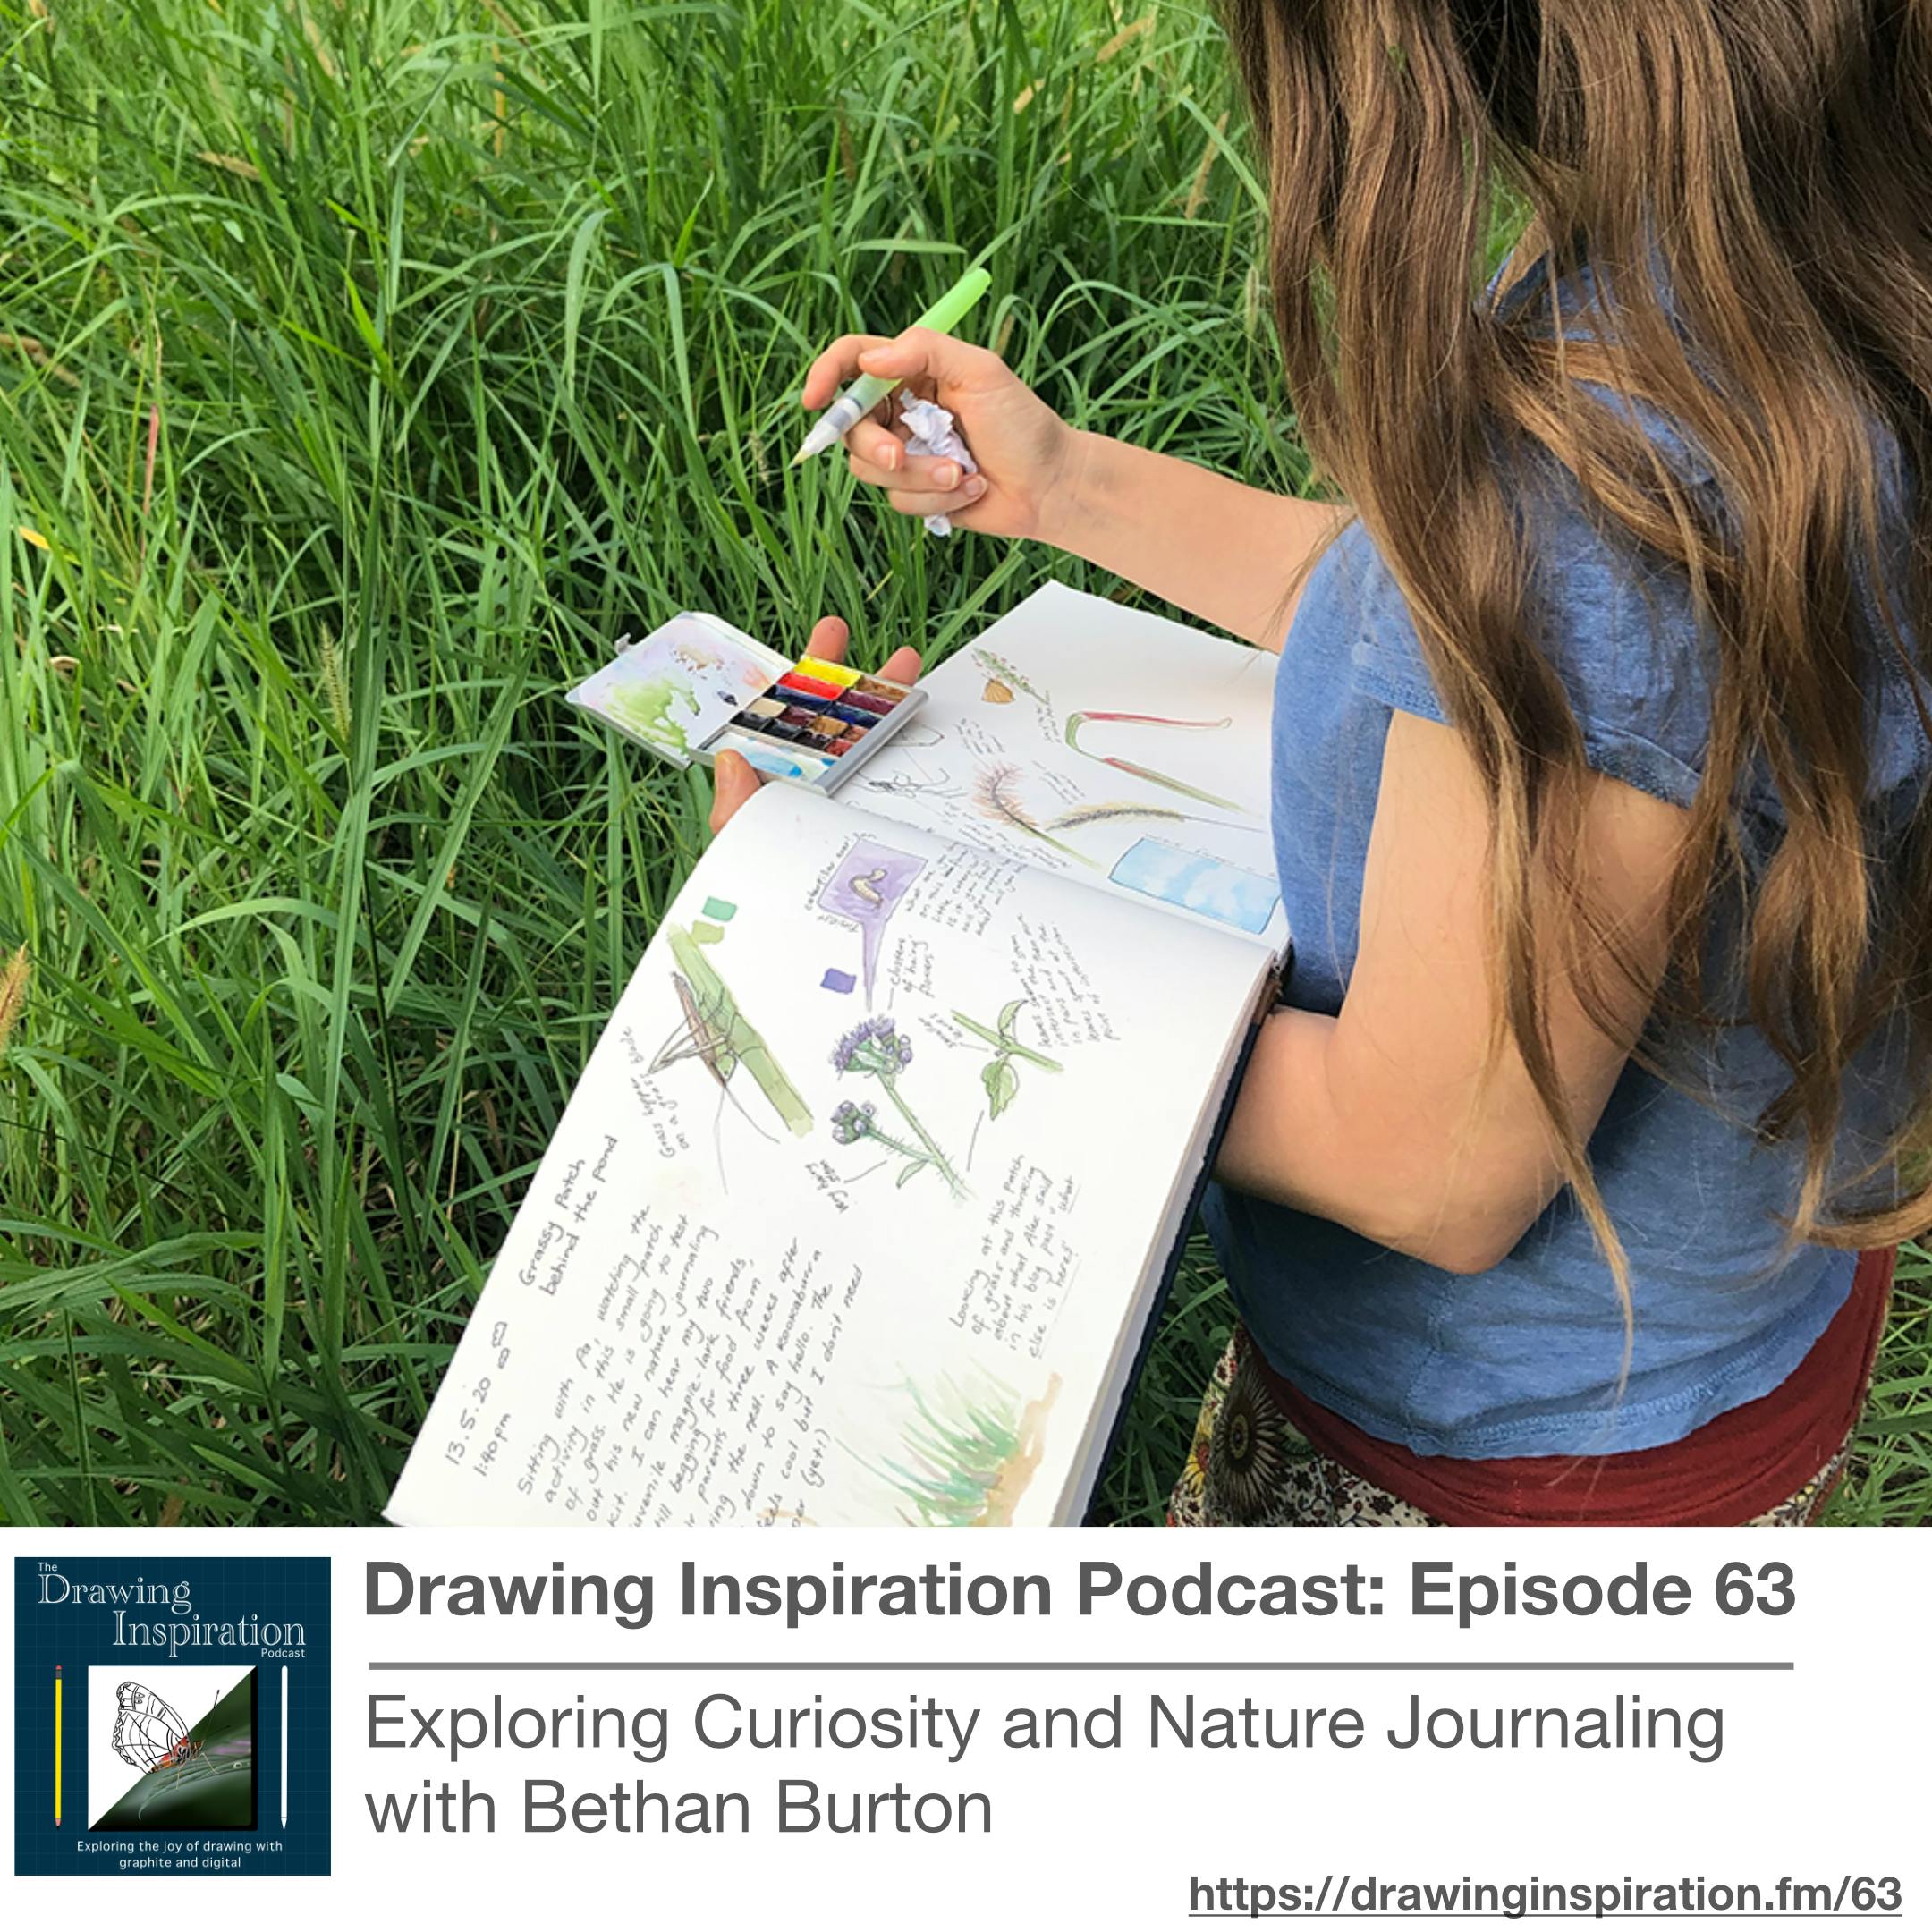 59: Turning a Passion into a Tool for Change with Wildlife Artist Sophie Green